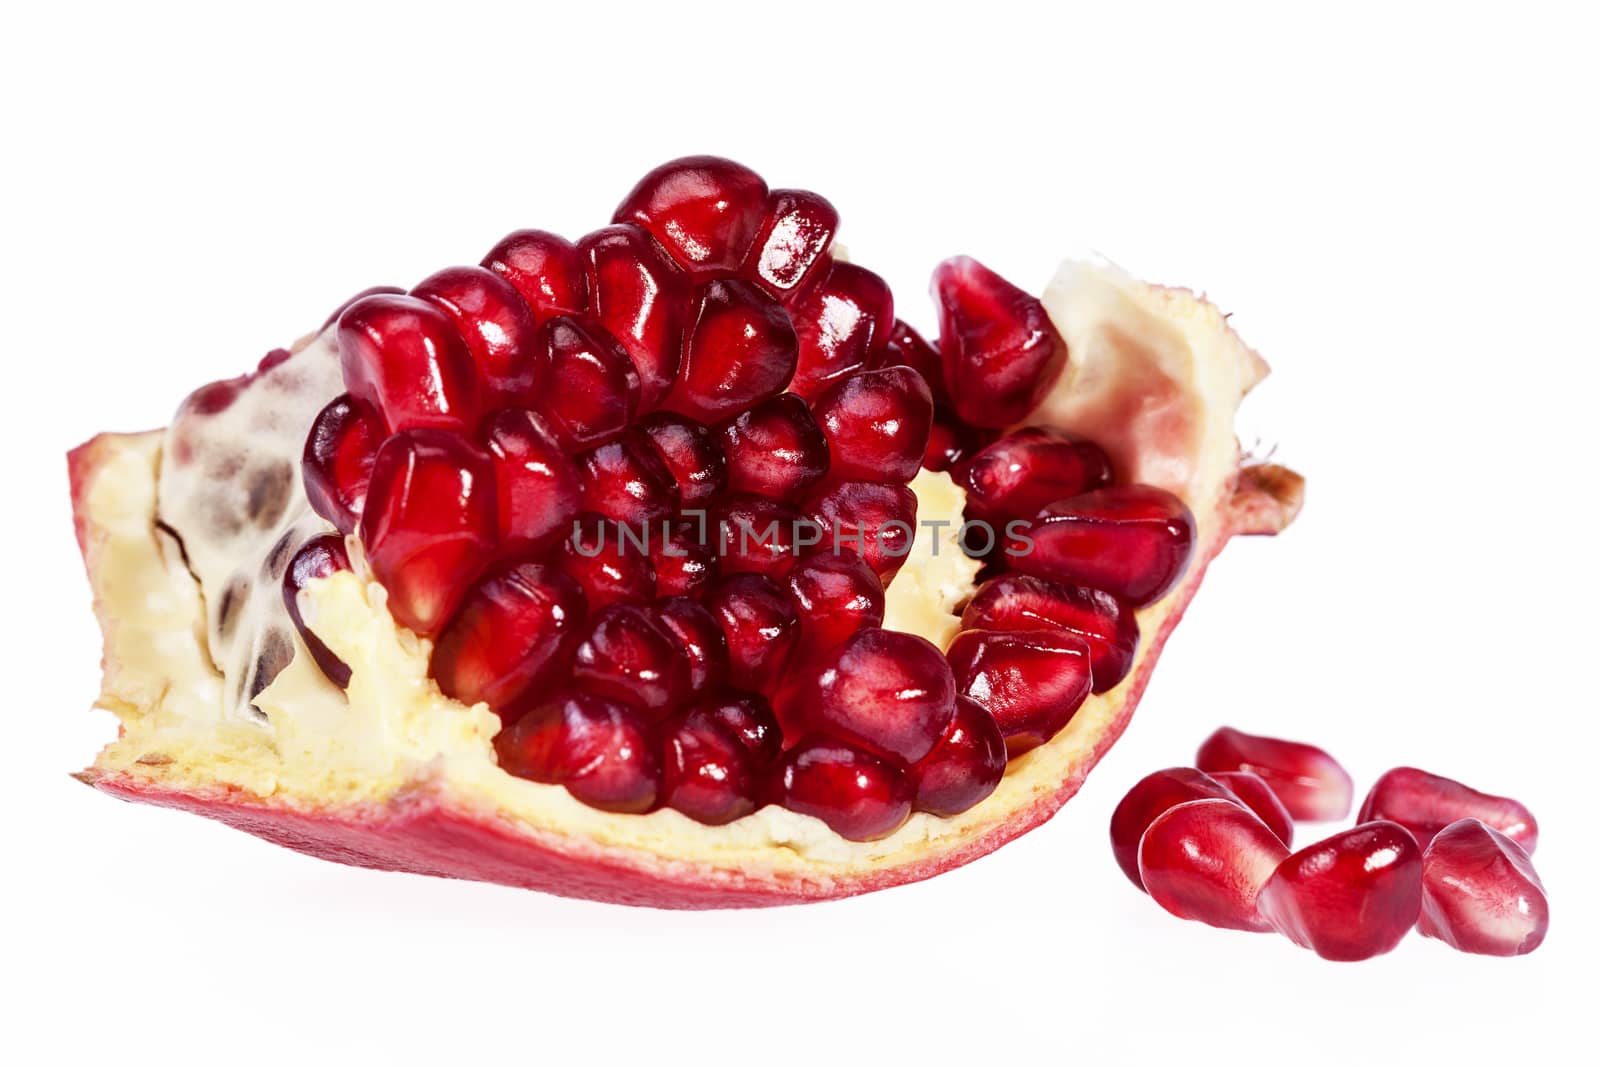  Fruit of red pomegranate isolated on white background by mychadre77